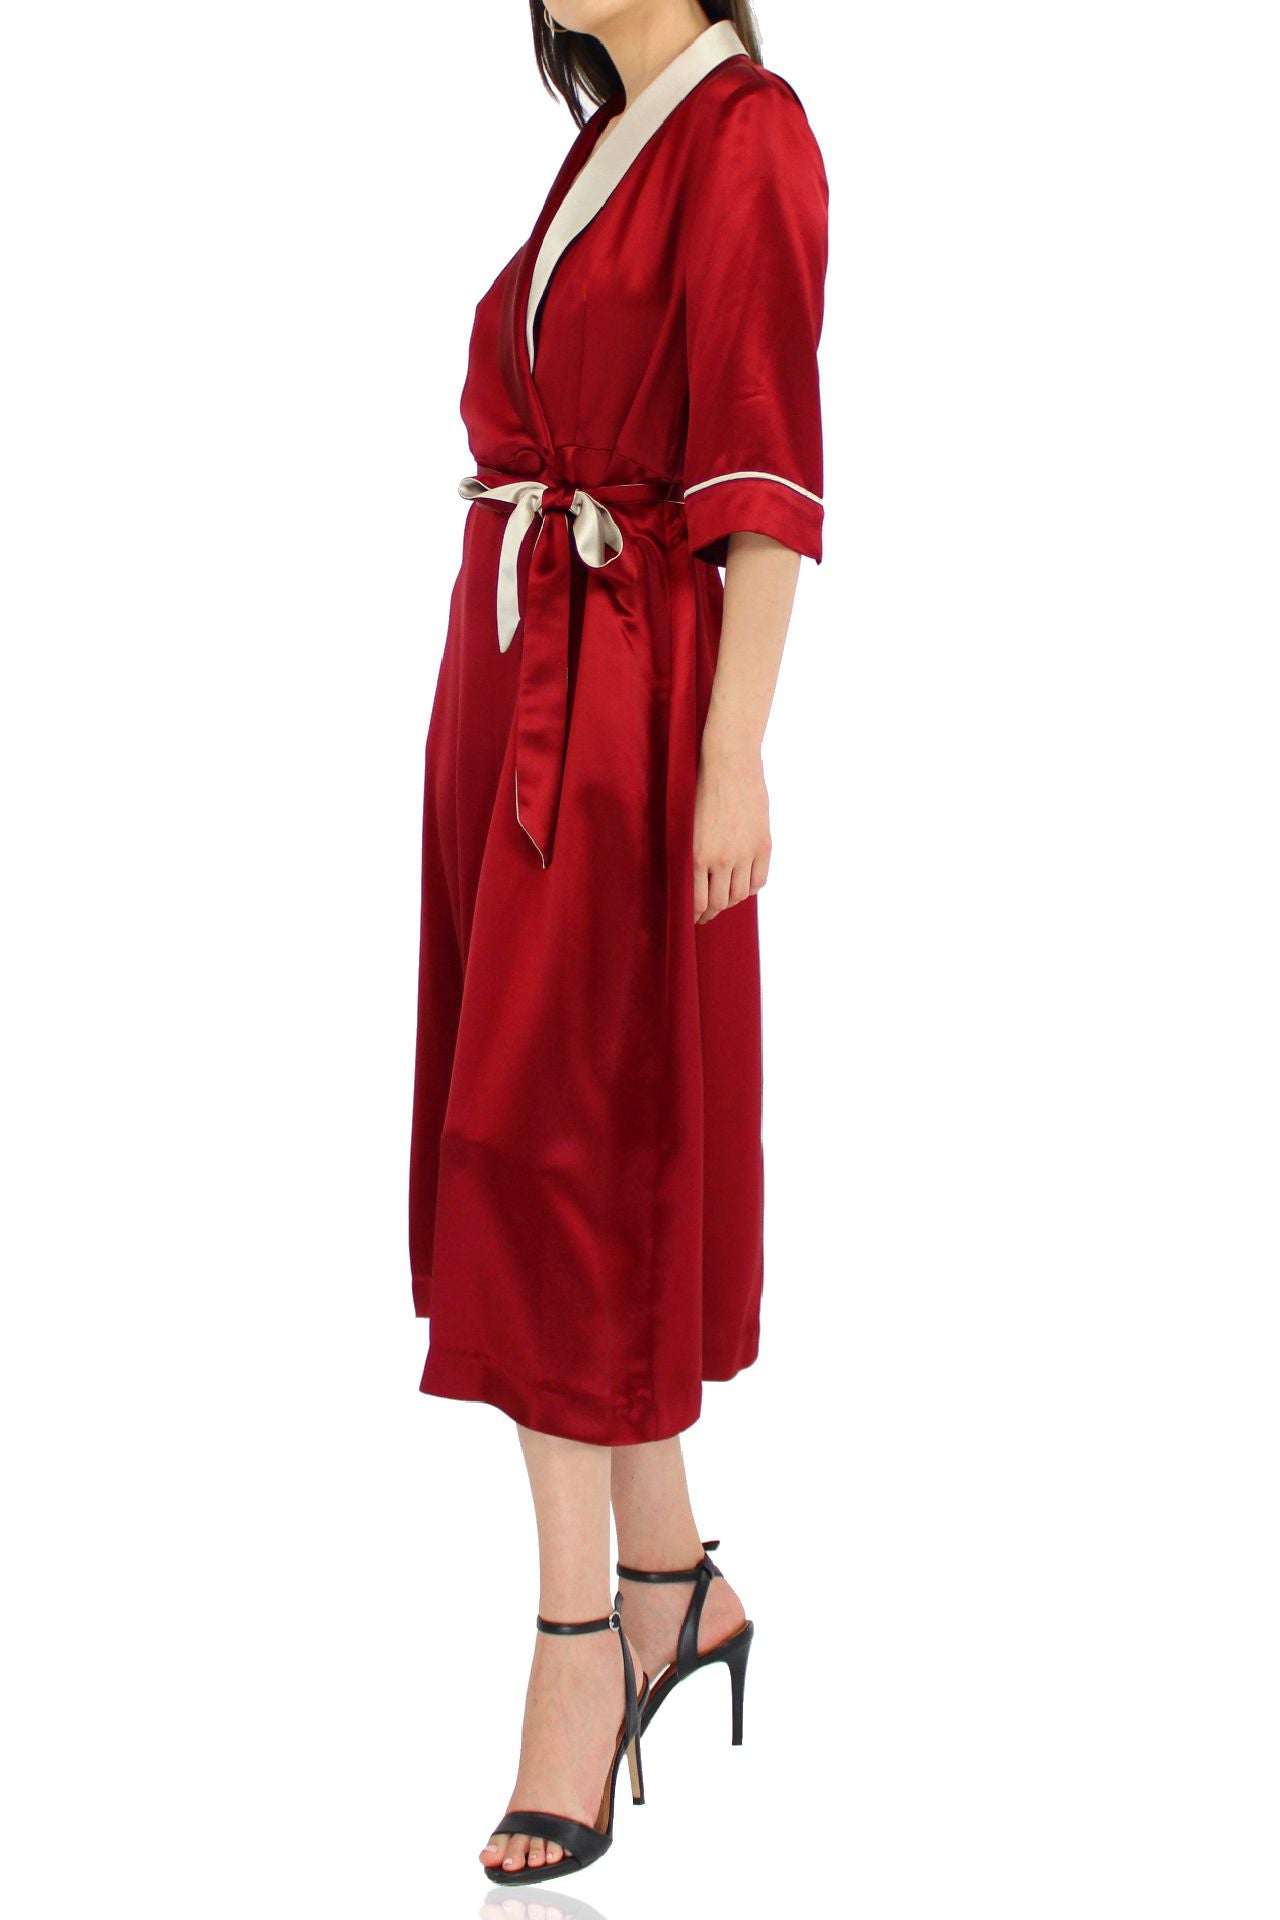 Women-Designer-Belted-Robe-Dress-In-Red-By-Kyle